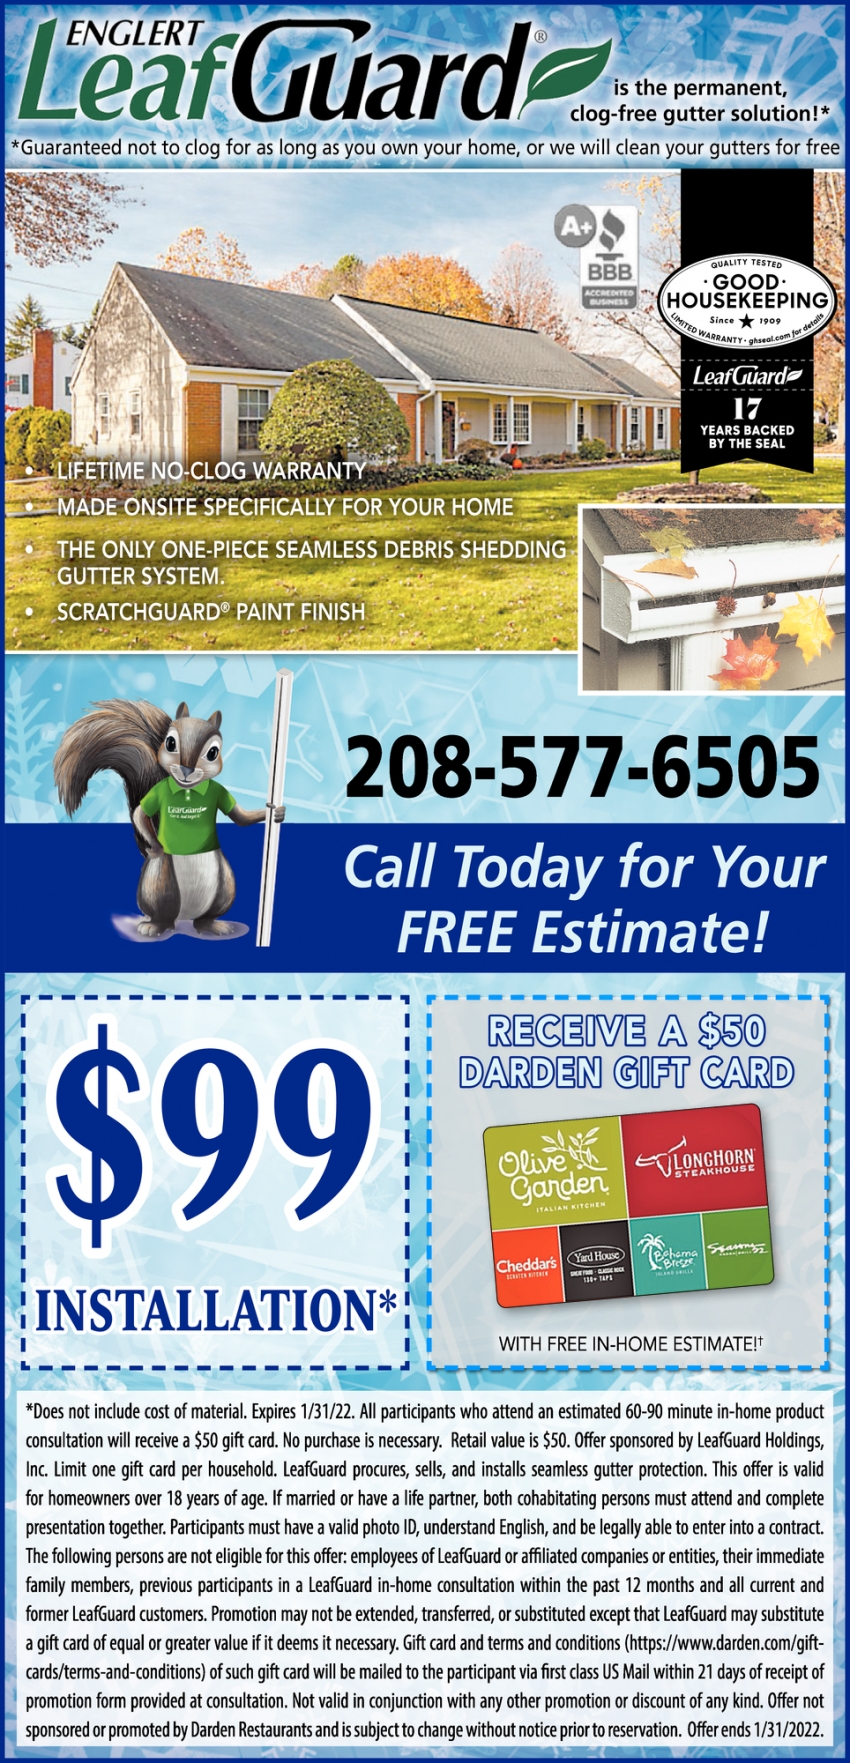 Call Today For Your Free Estimate!